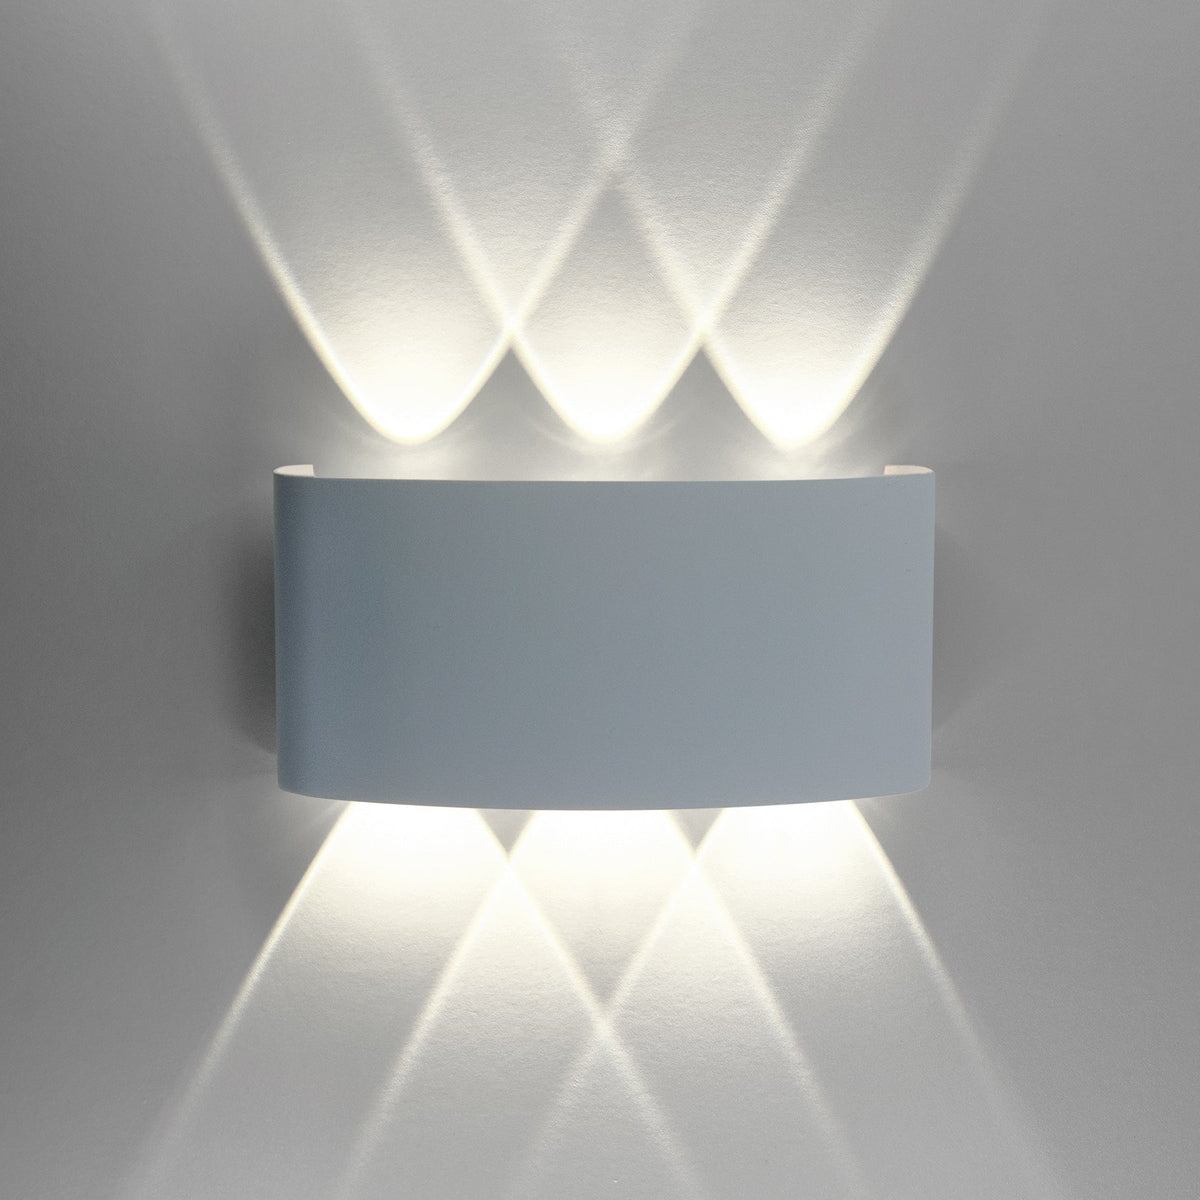 G.W.S. LED LED Wall Lights 6W White Up and Down LED Wall Light (WL-T6)